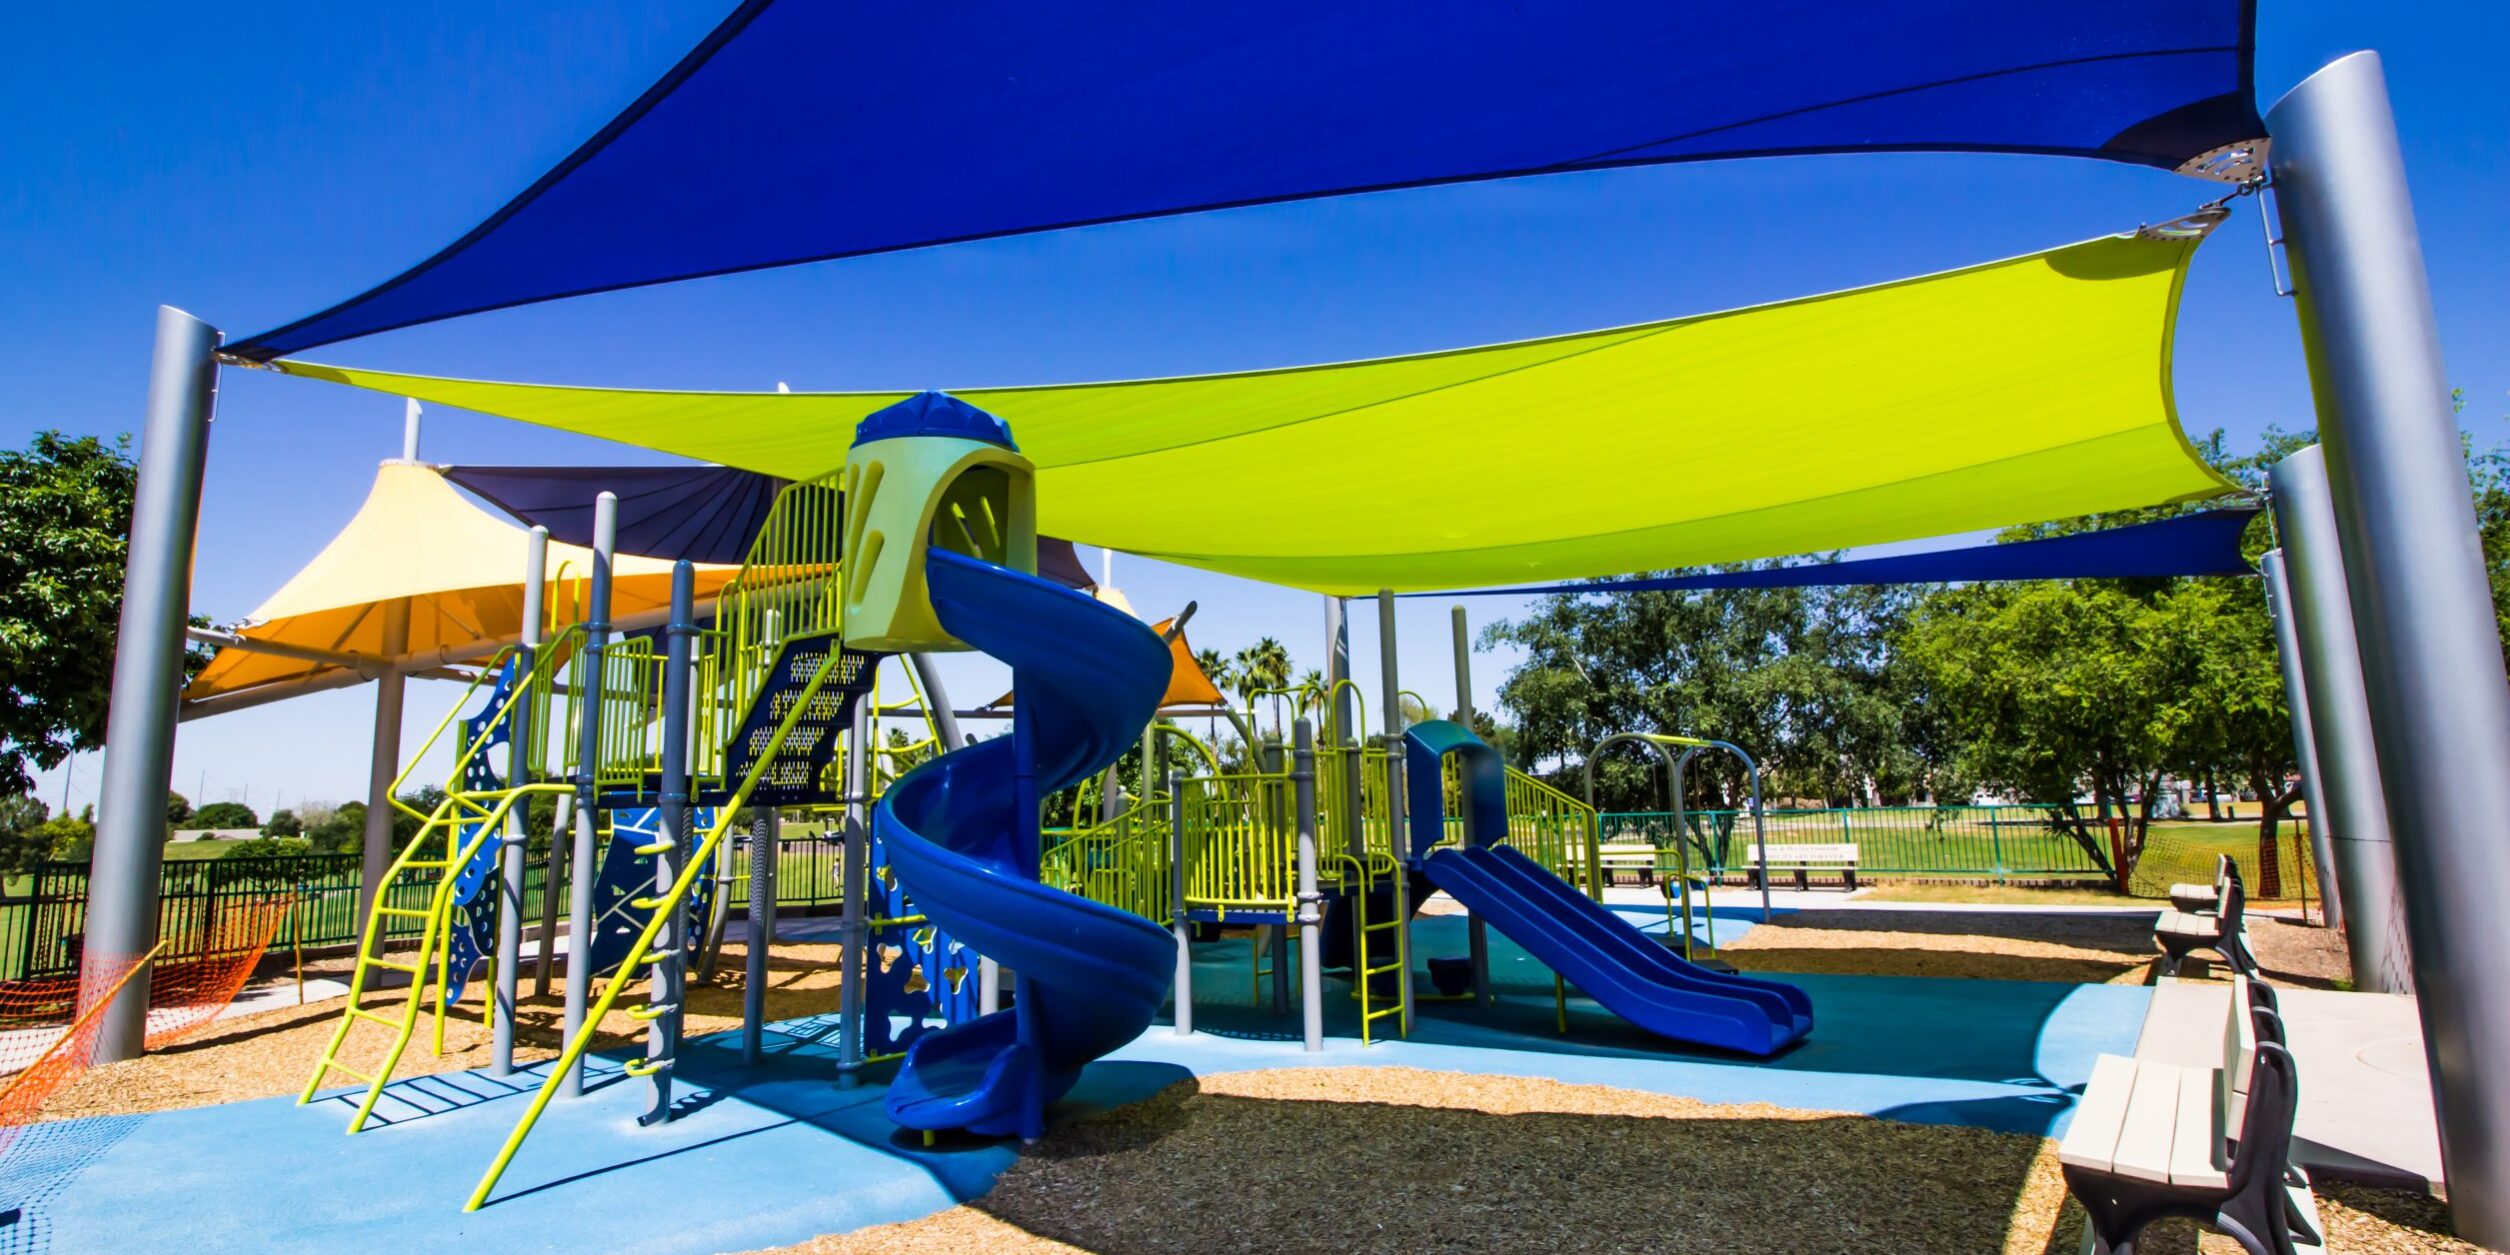 What Is the Best Shade Structure for a Playground